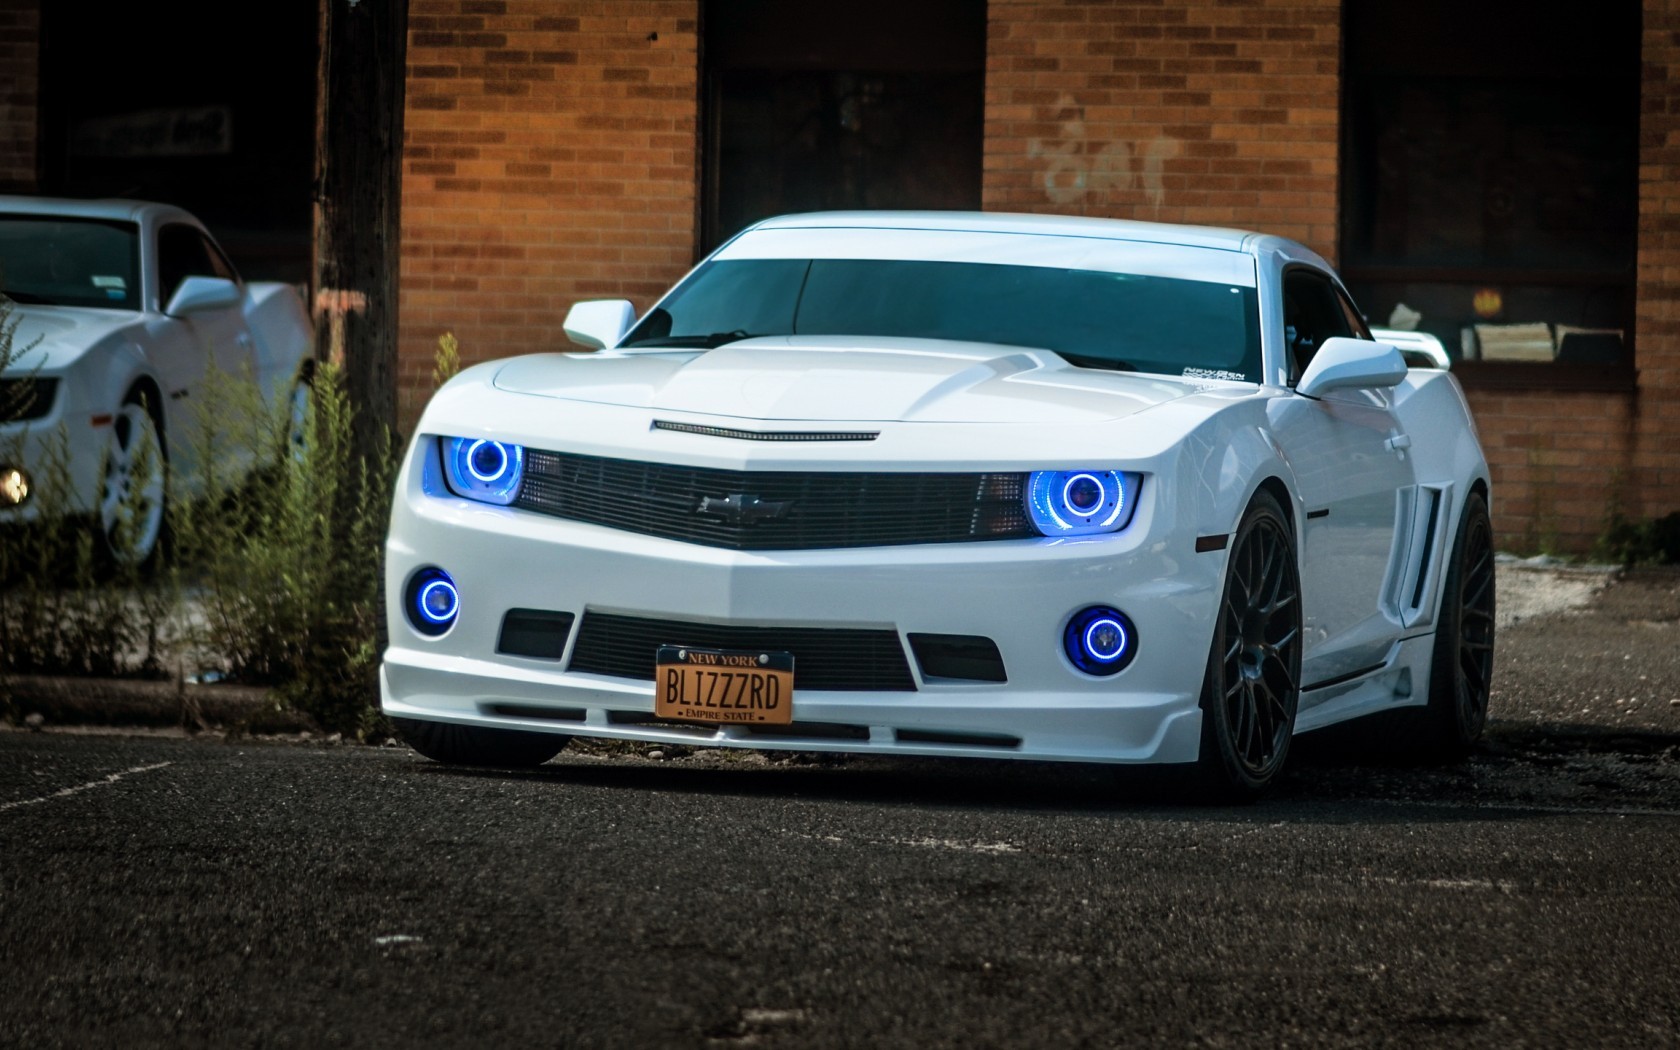 General 1680x1050 car vehicle white cars Chevrolet Chevrolet Camaro muscle cars American cars